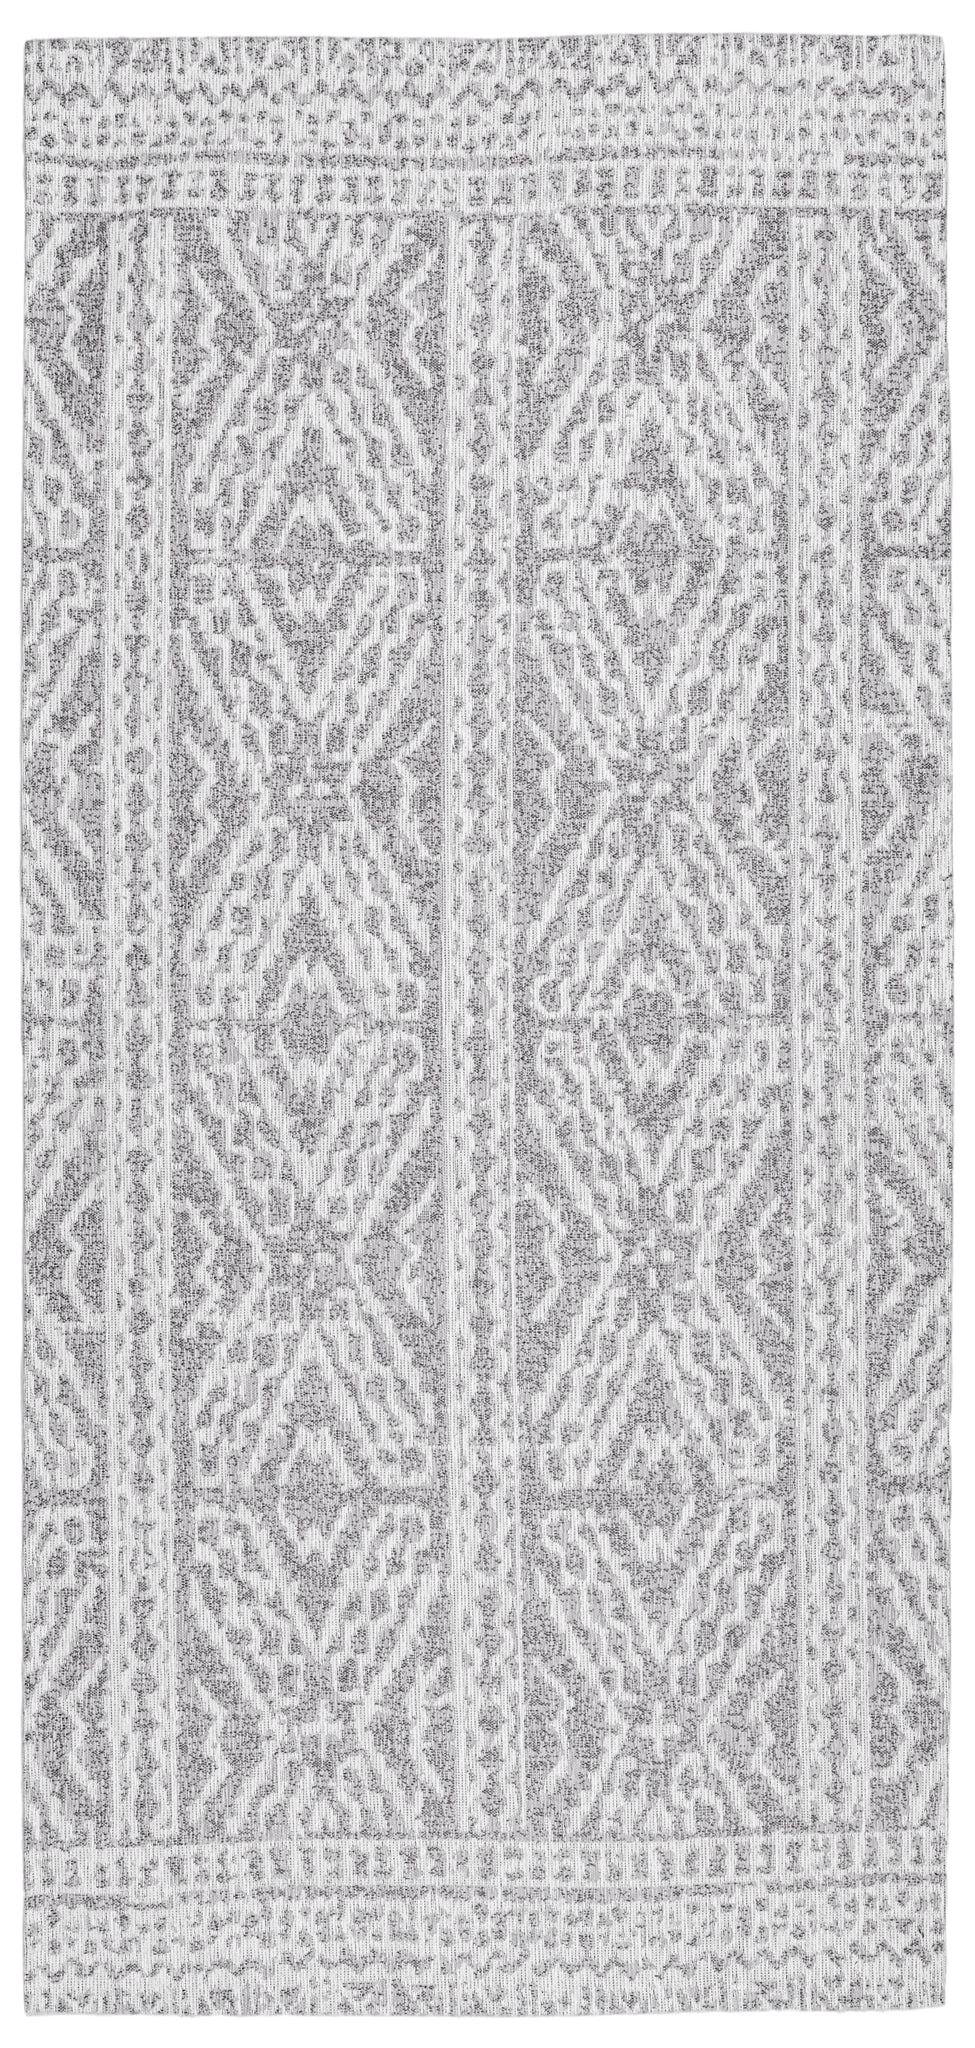 Washable Area rug | The Rugger Lillian | Gray & White | 3x7 | By MotherRuggers.com | Machine Washable | Jacquard Woven | Pet Friendly | Kid Friendly | Machine Wash | Line Dry | Living Room | Kitchen | Bedroom | High-Traffic | Anti-Slip | Three-year warranty with proper care | Shake or light Vacuum | Machine Wash as needed | Dry Flat or Line Dry | Dries fast